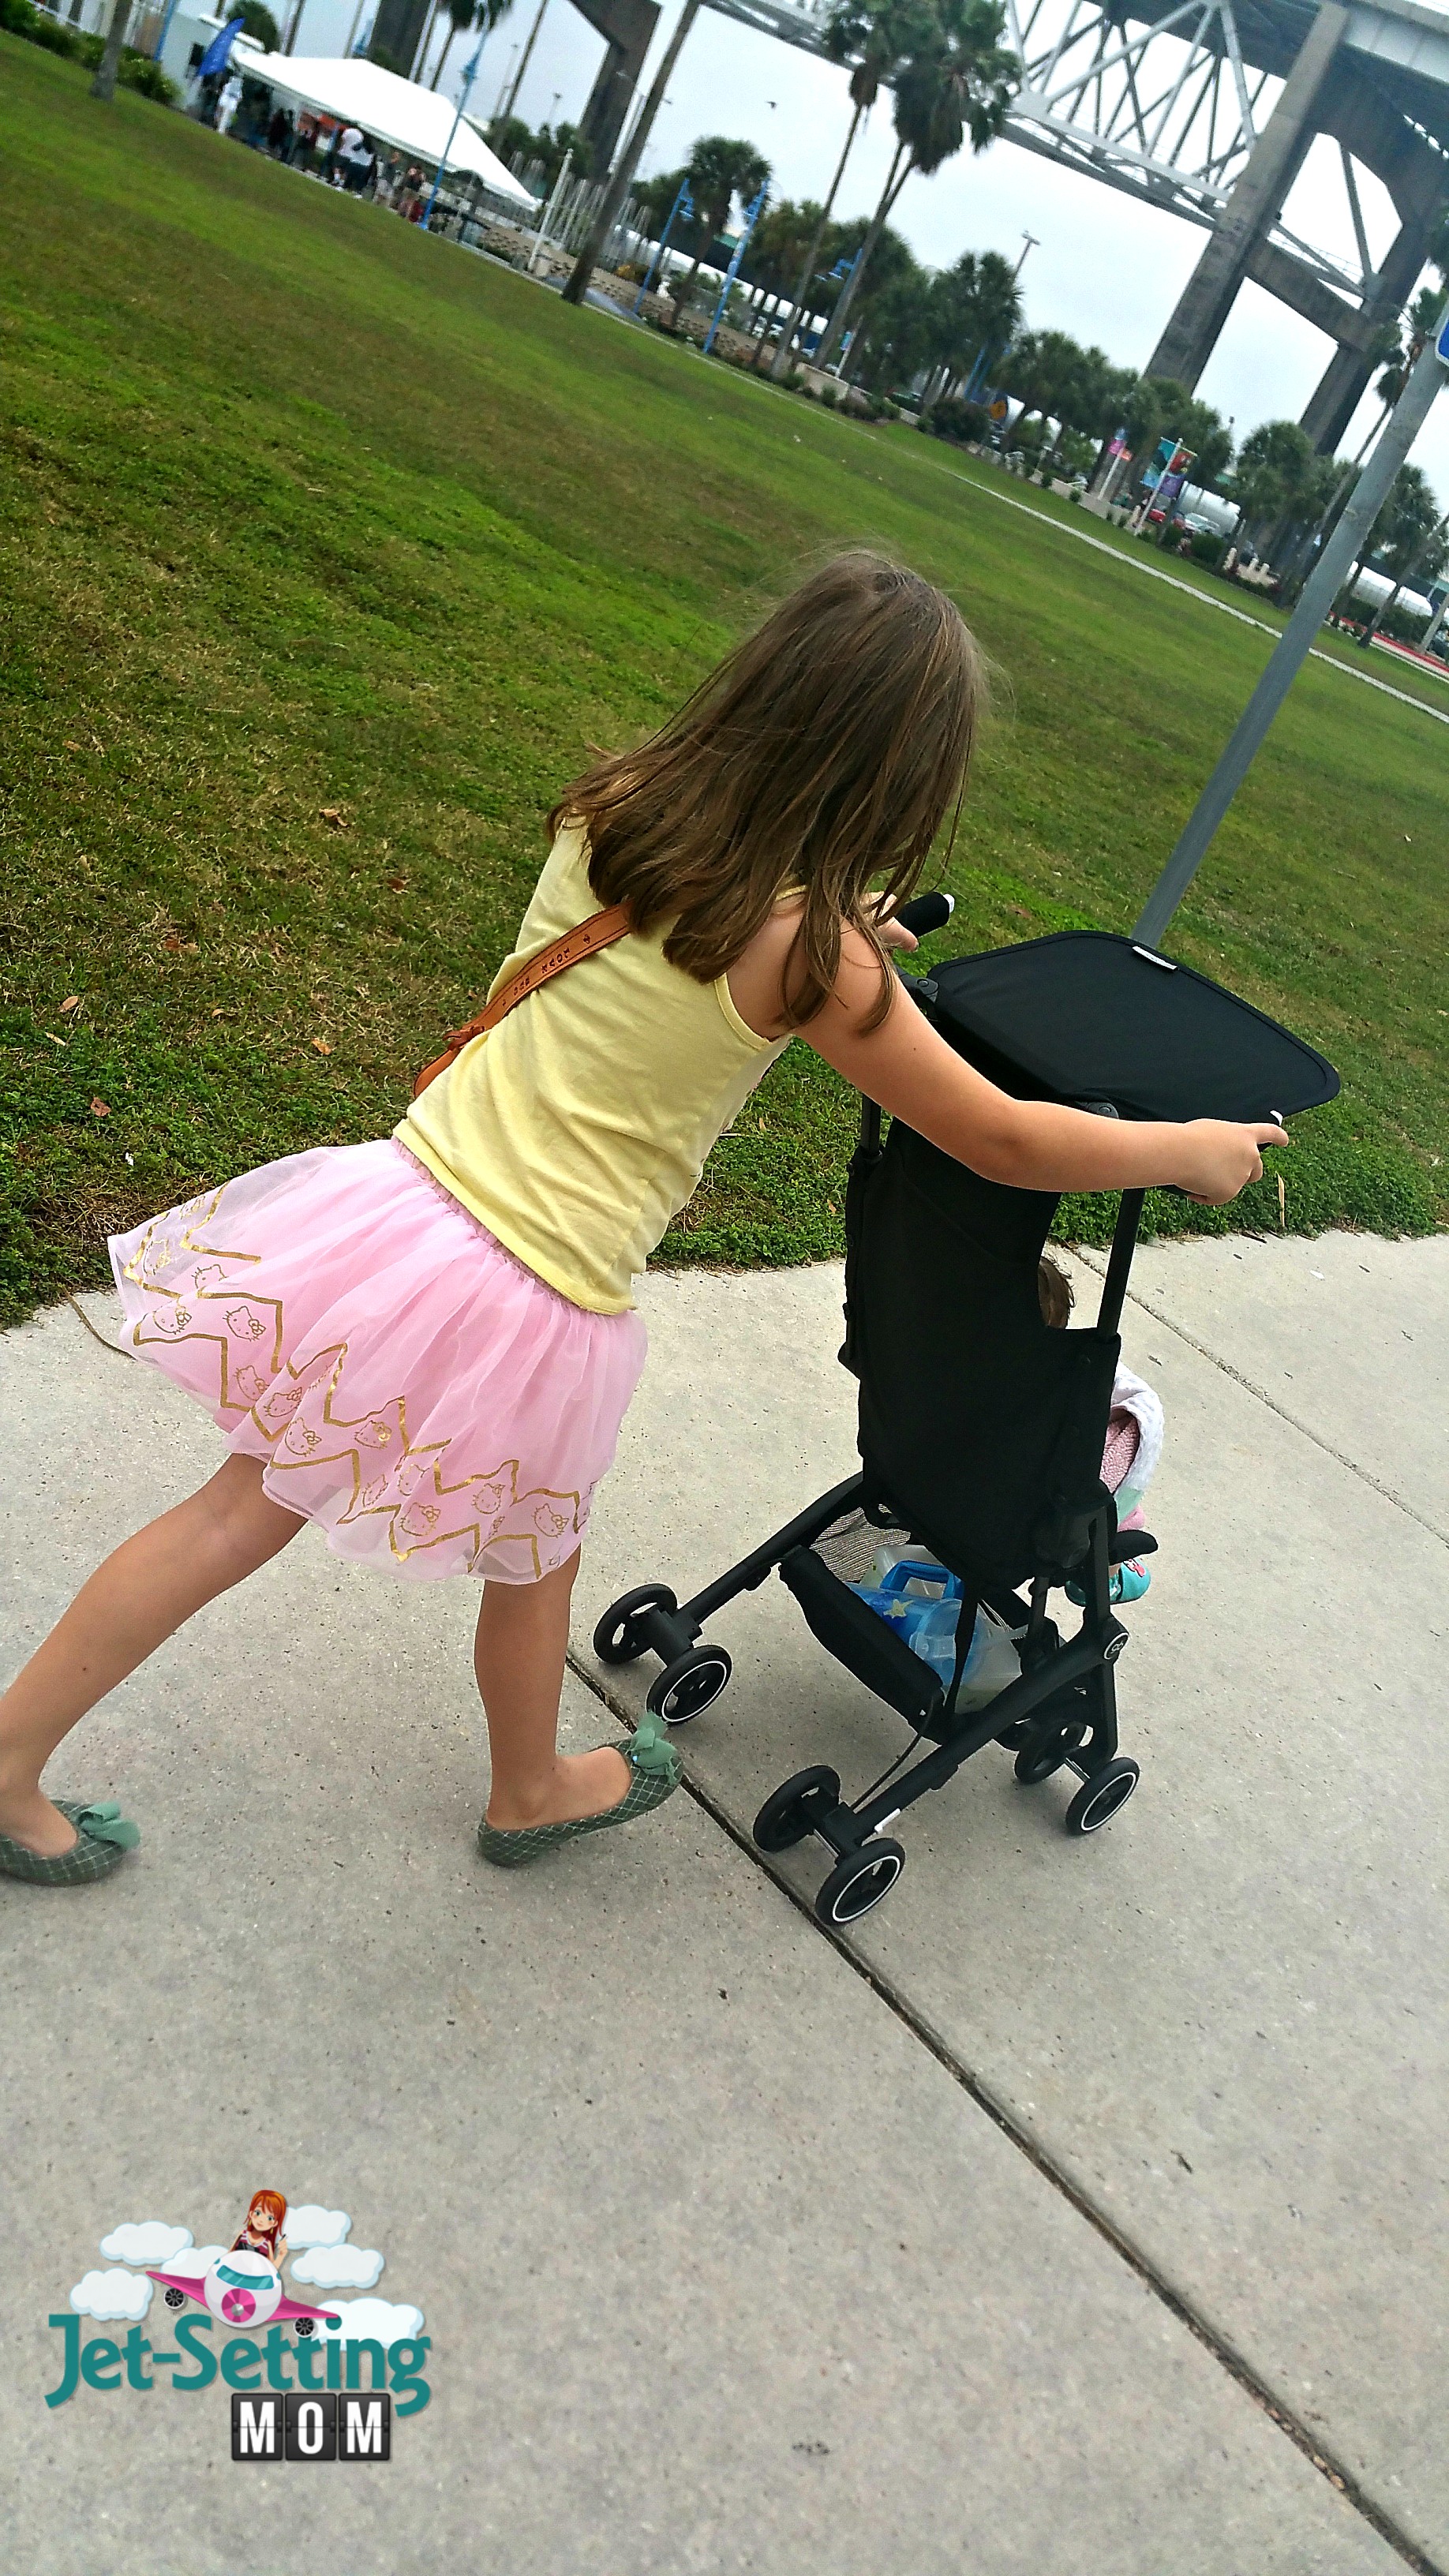 The gb Pockit stroller is super easy to navigate even for my 6 year old